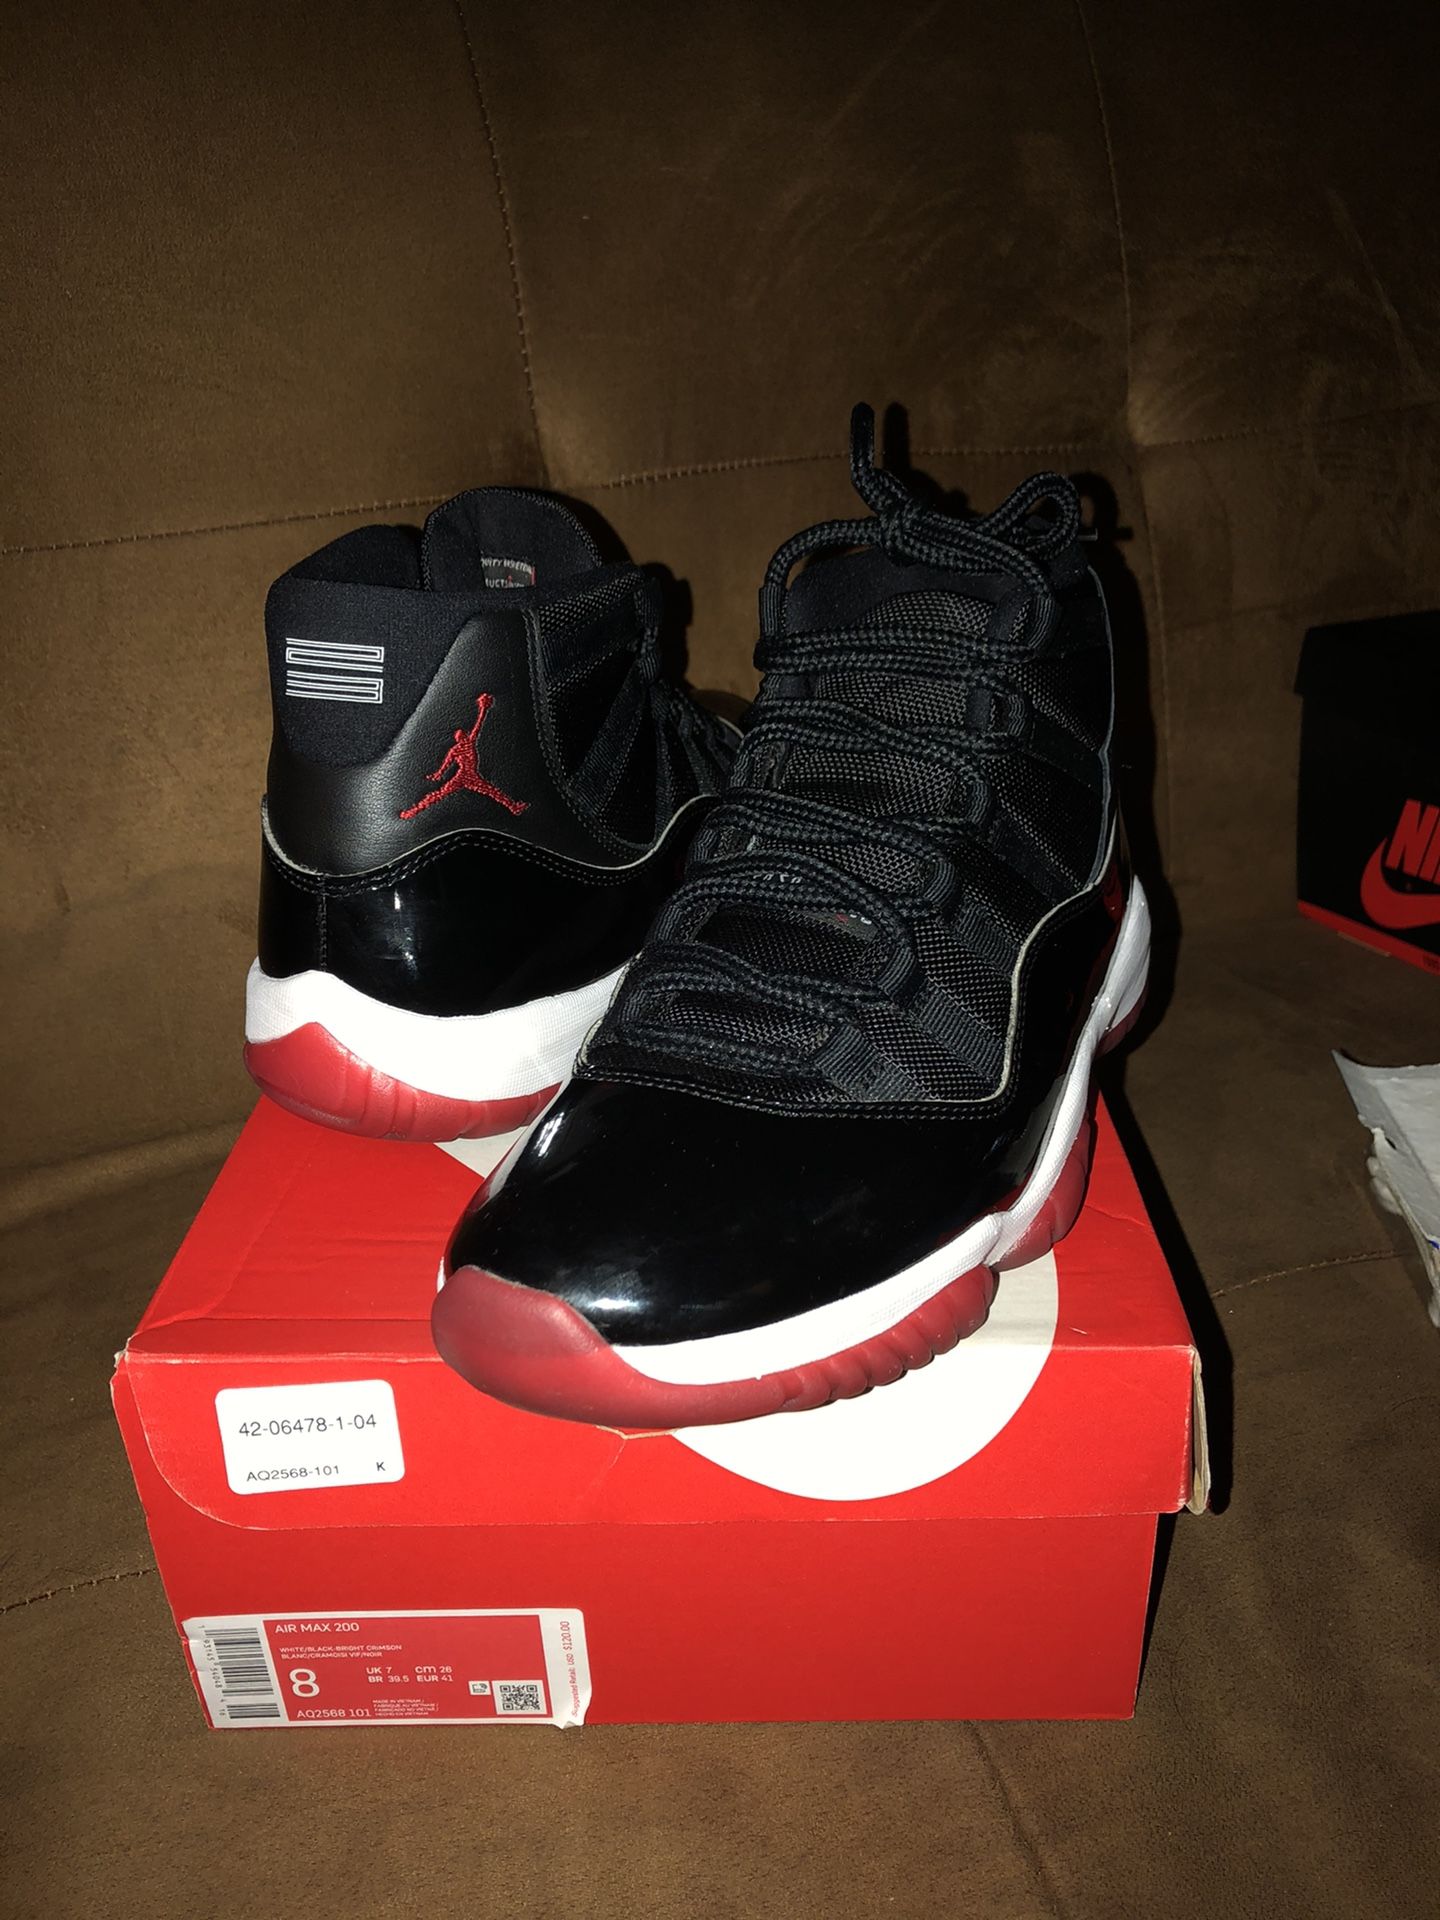 Bred 11s size 8